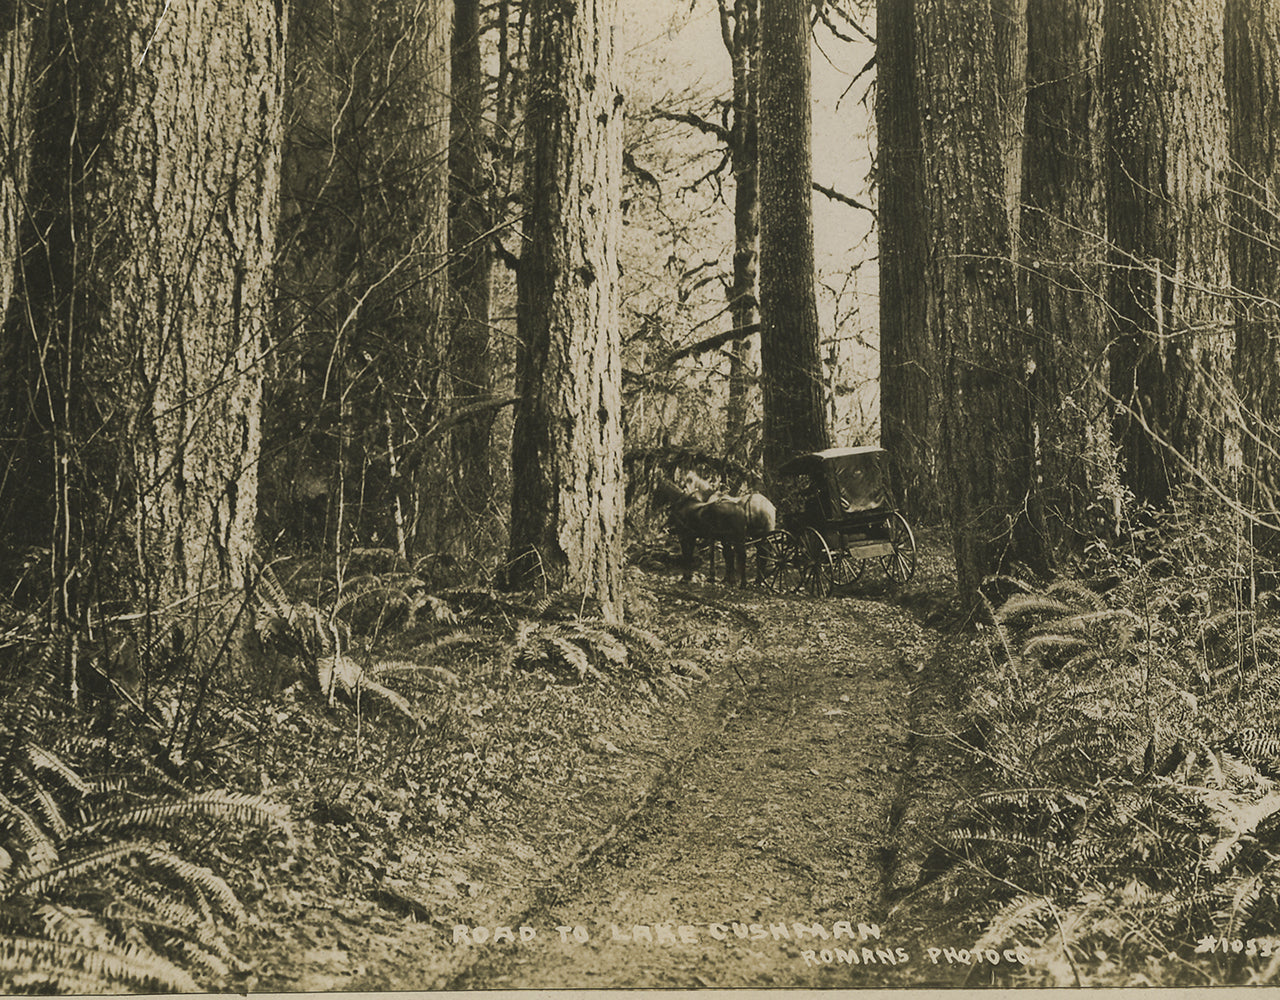 Wagon trail to Lake Cushman through the old growth forest